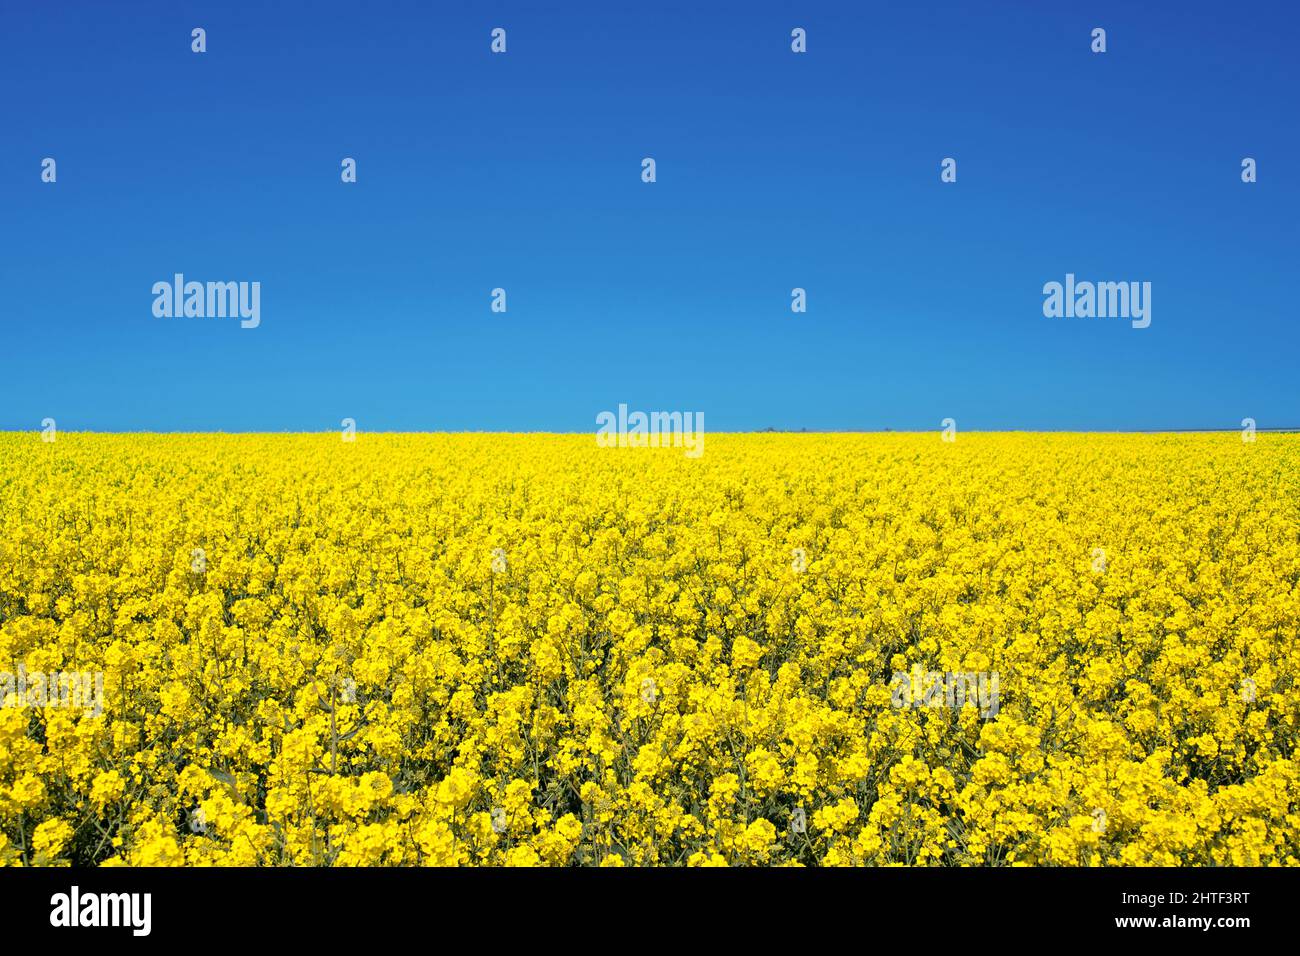 Field of colza rapeseed yellow flowers and blue sky, Ukrainian flag colors, Ukraine agriculture illustration Stock Photo